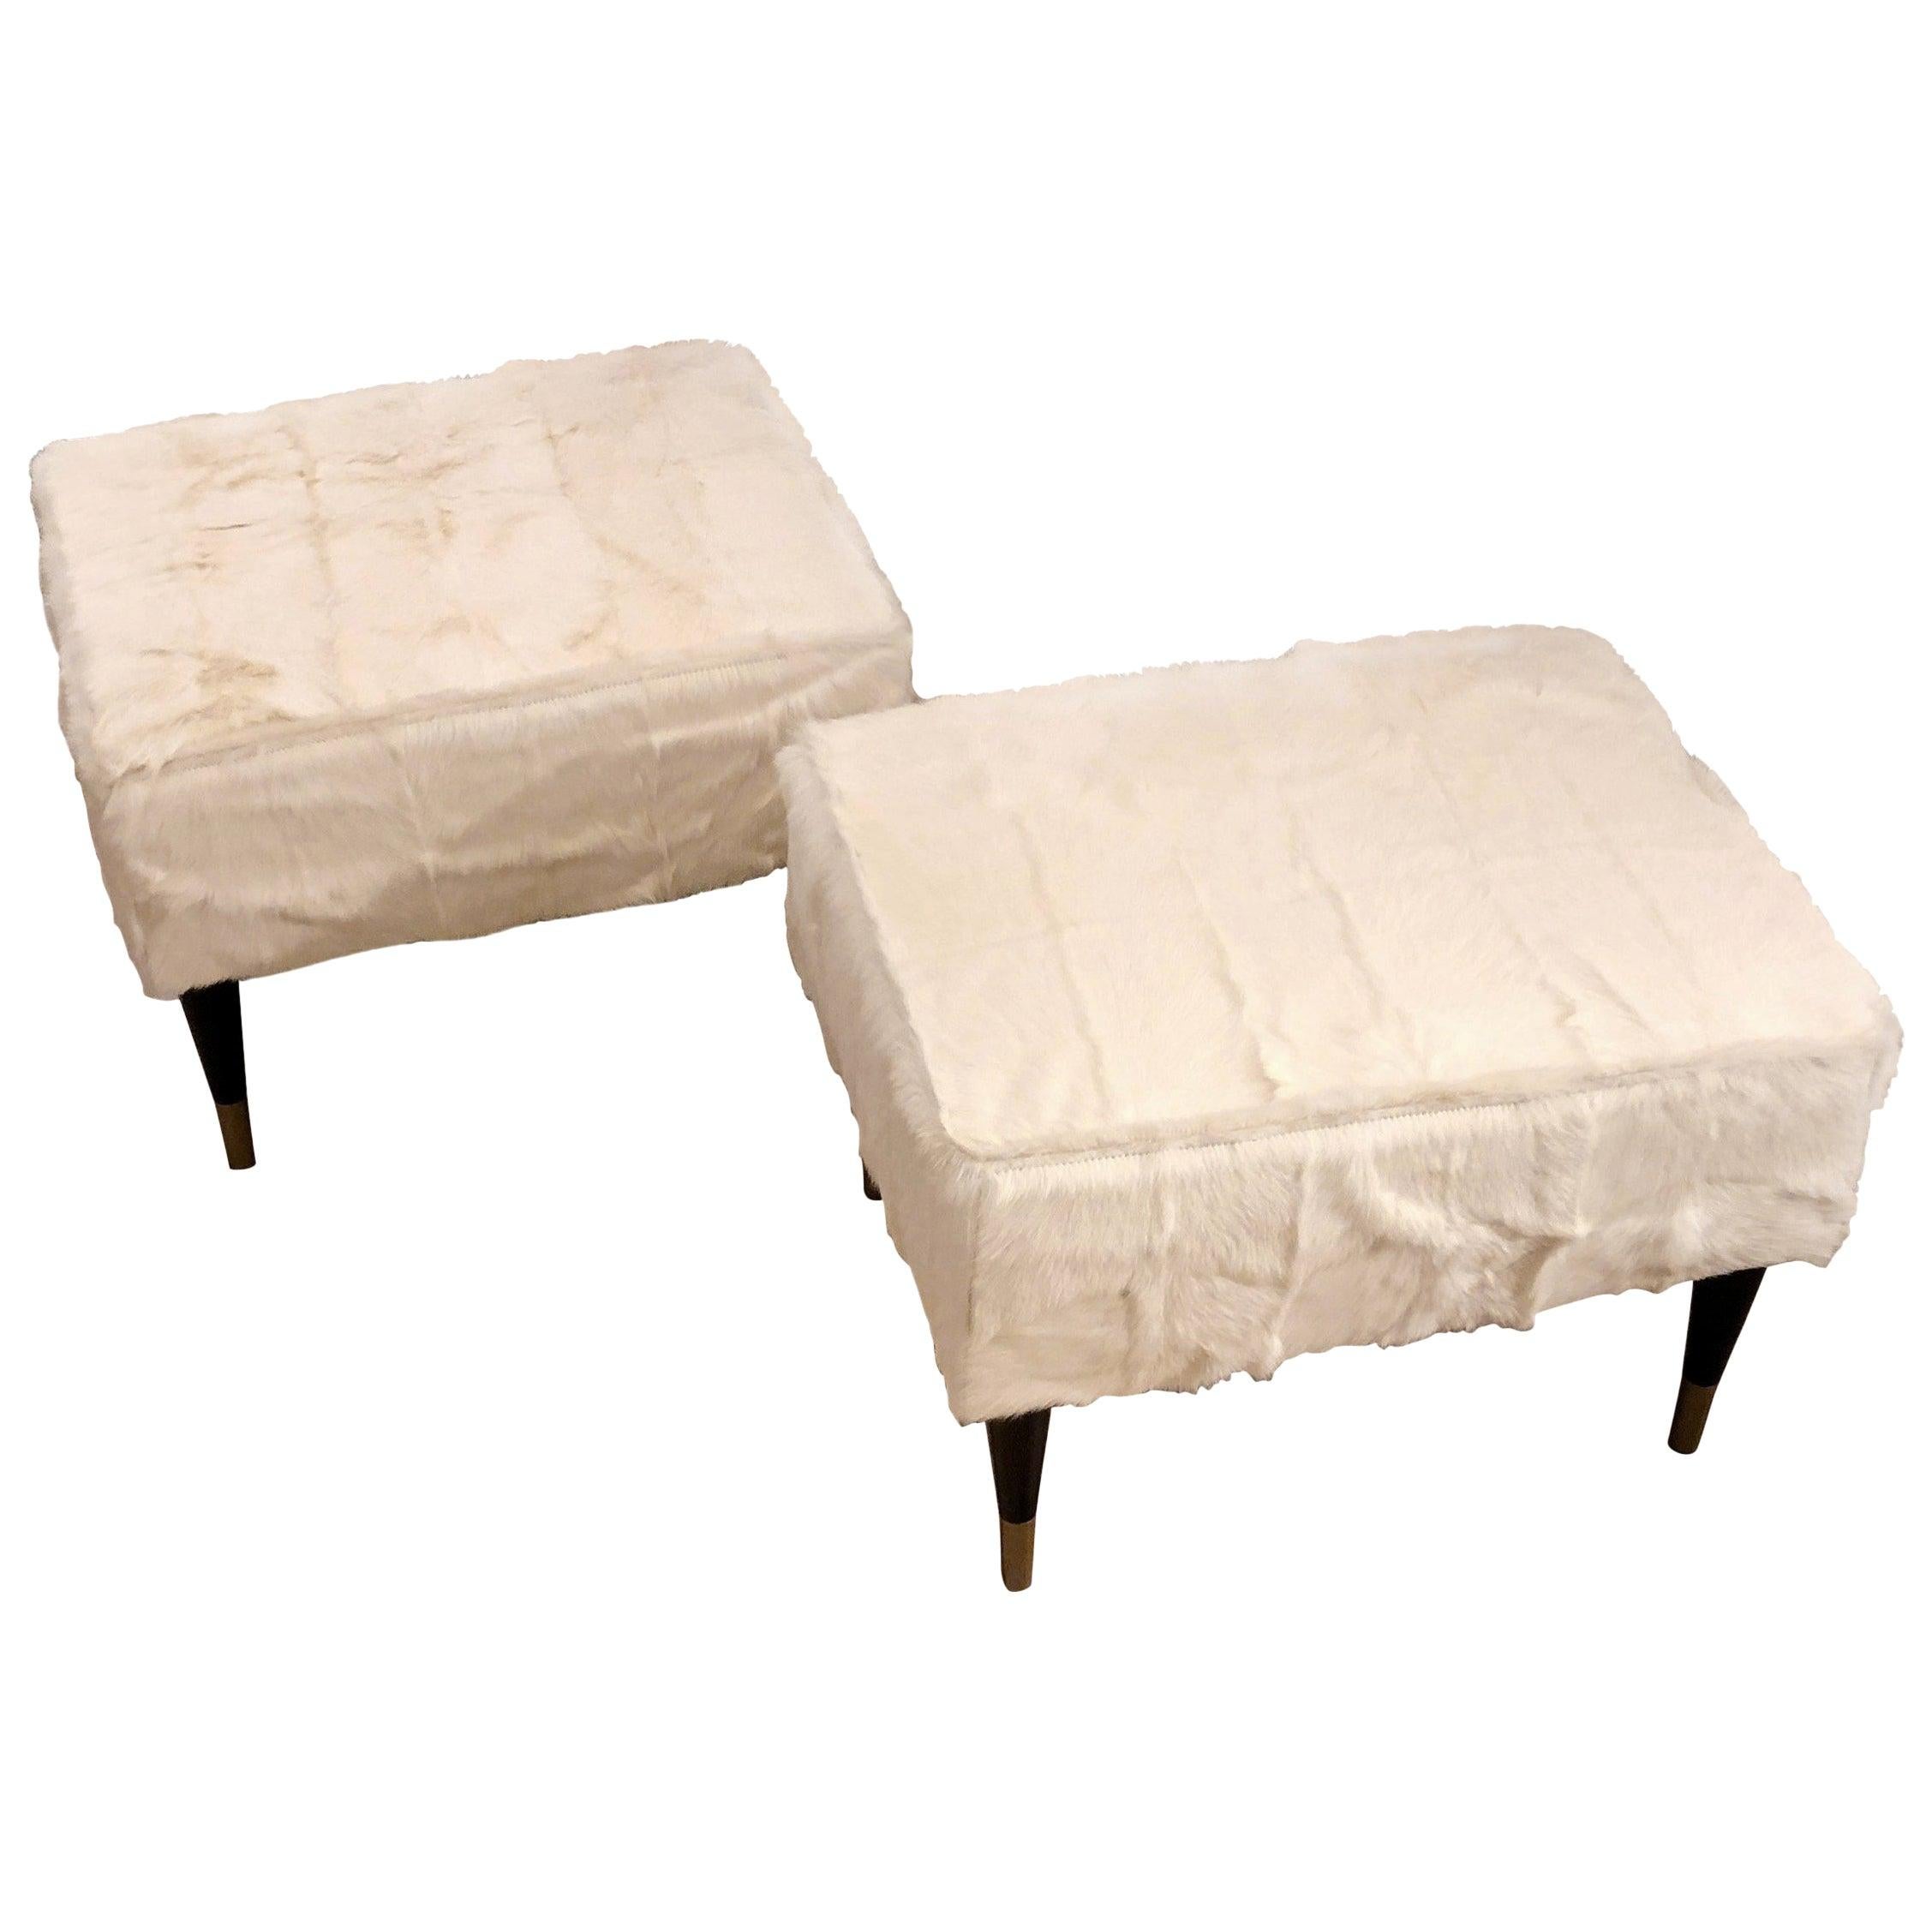 Customizable White Fur Black Legs Bronze Endings Stools or Benches 1950s Style